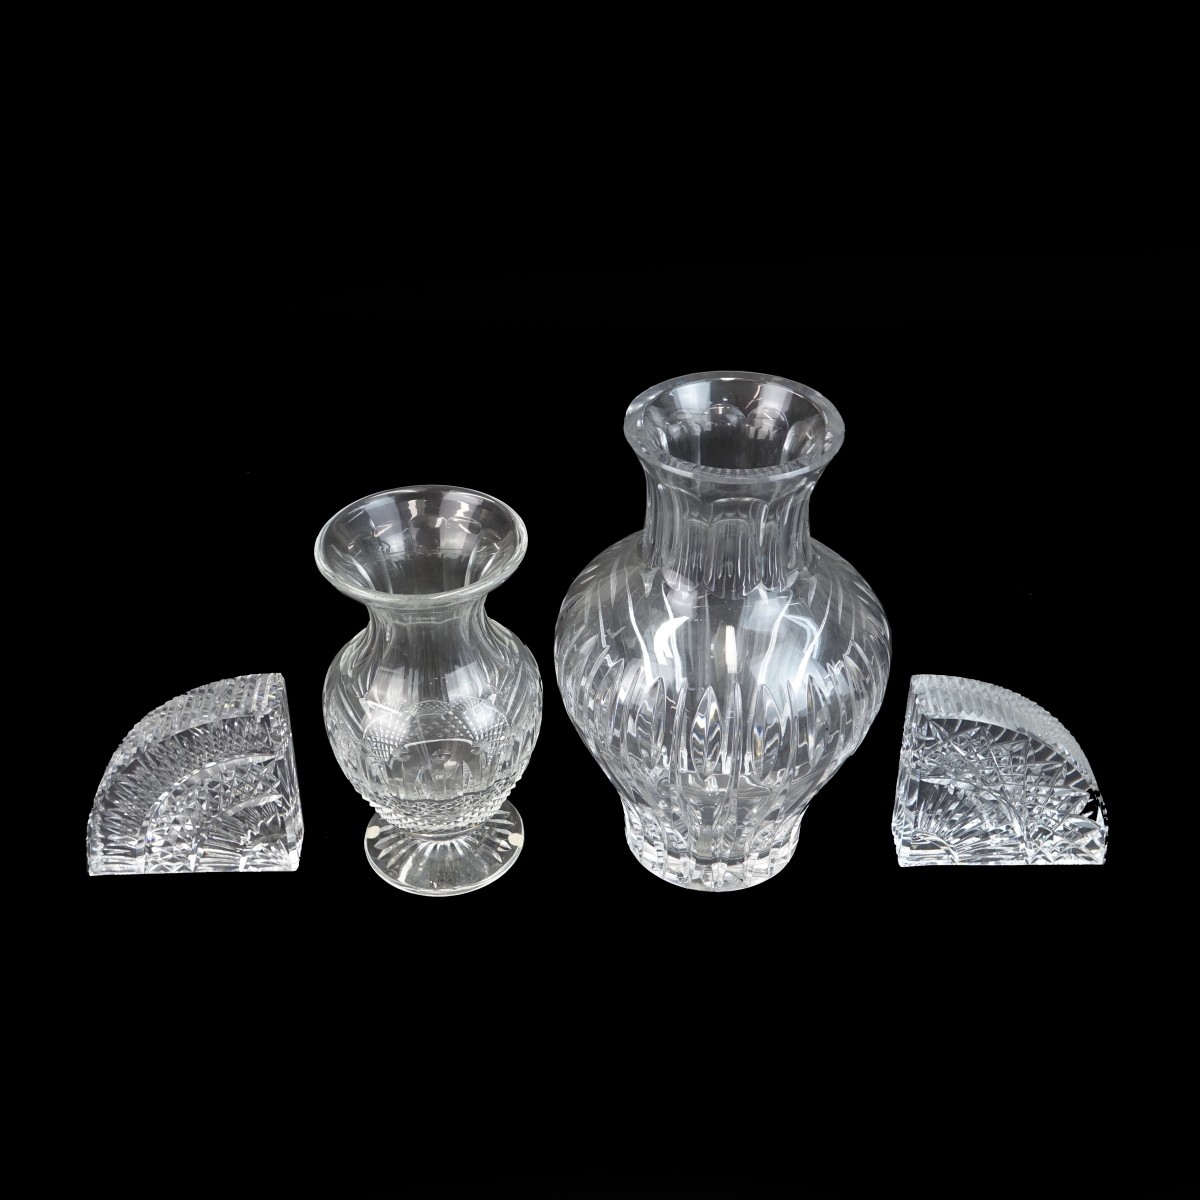 Vintage Waterford Crystal Bookends and Vases